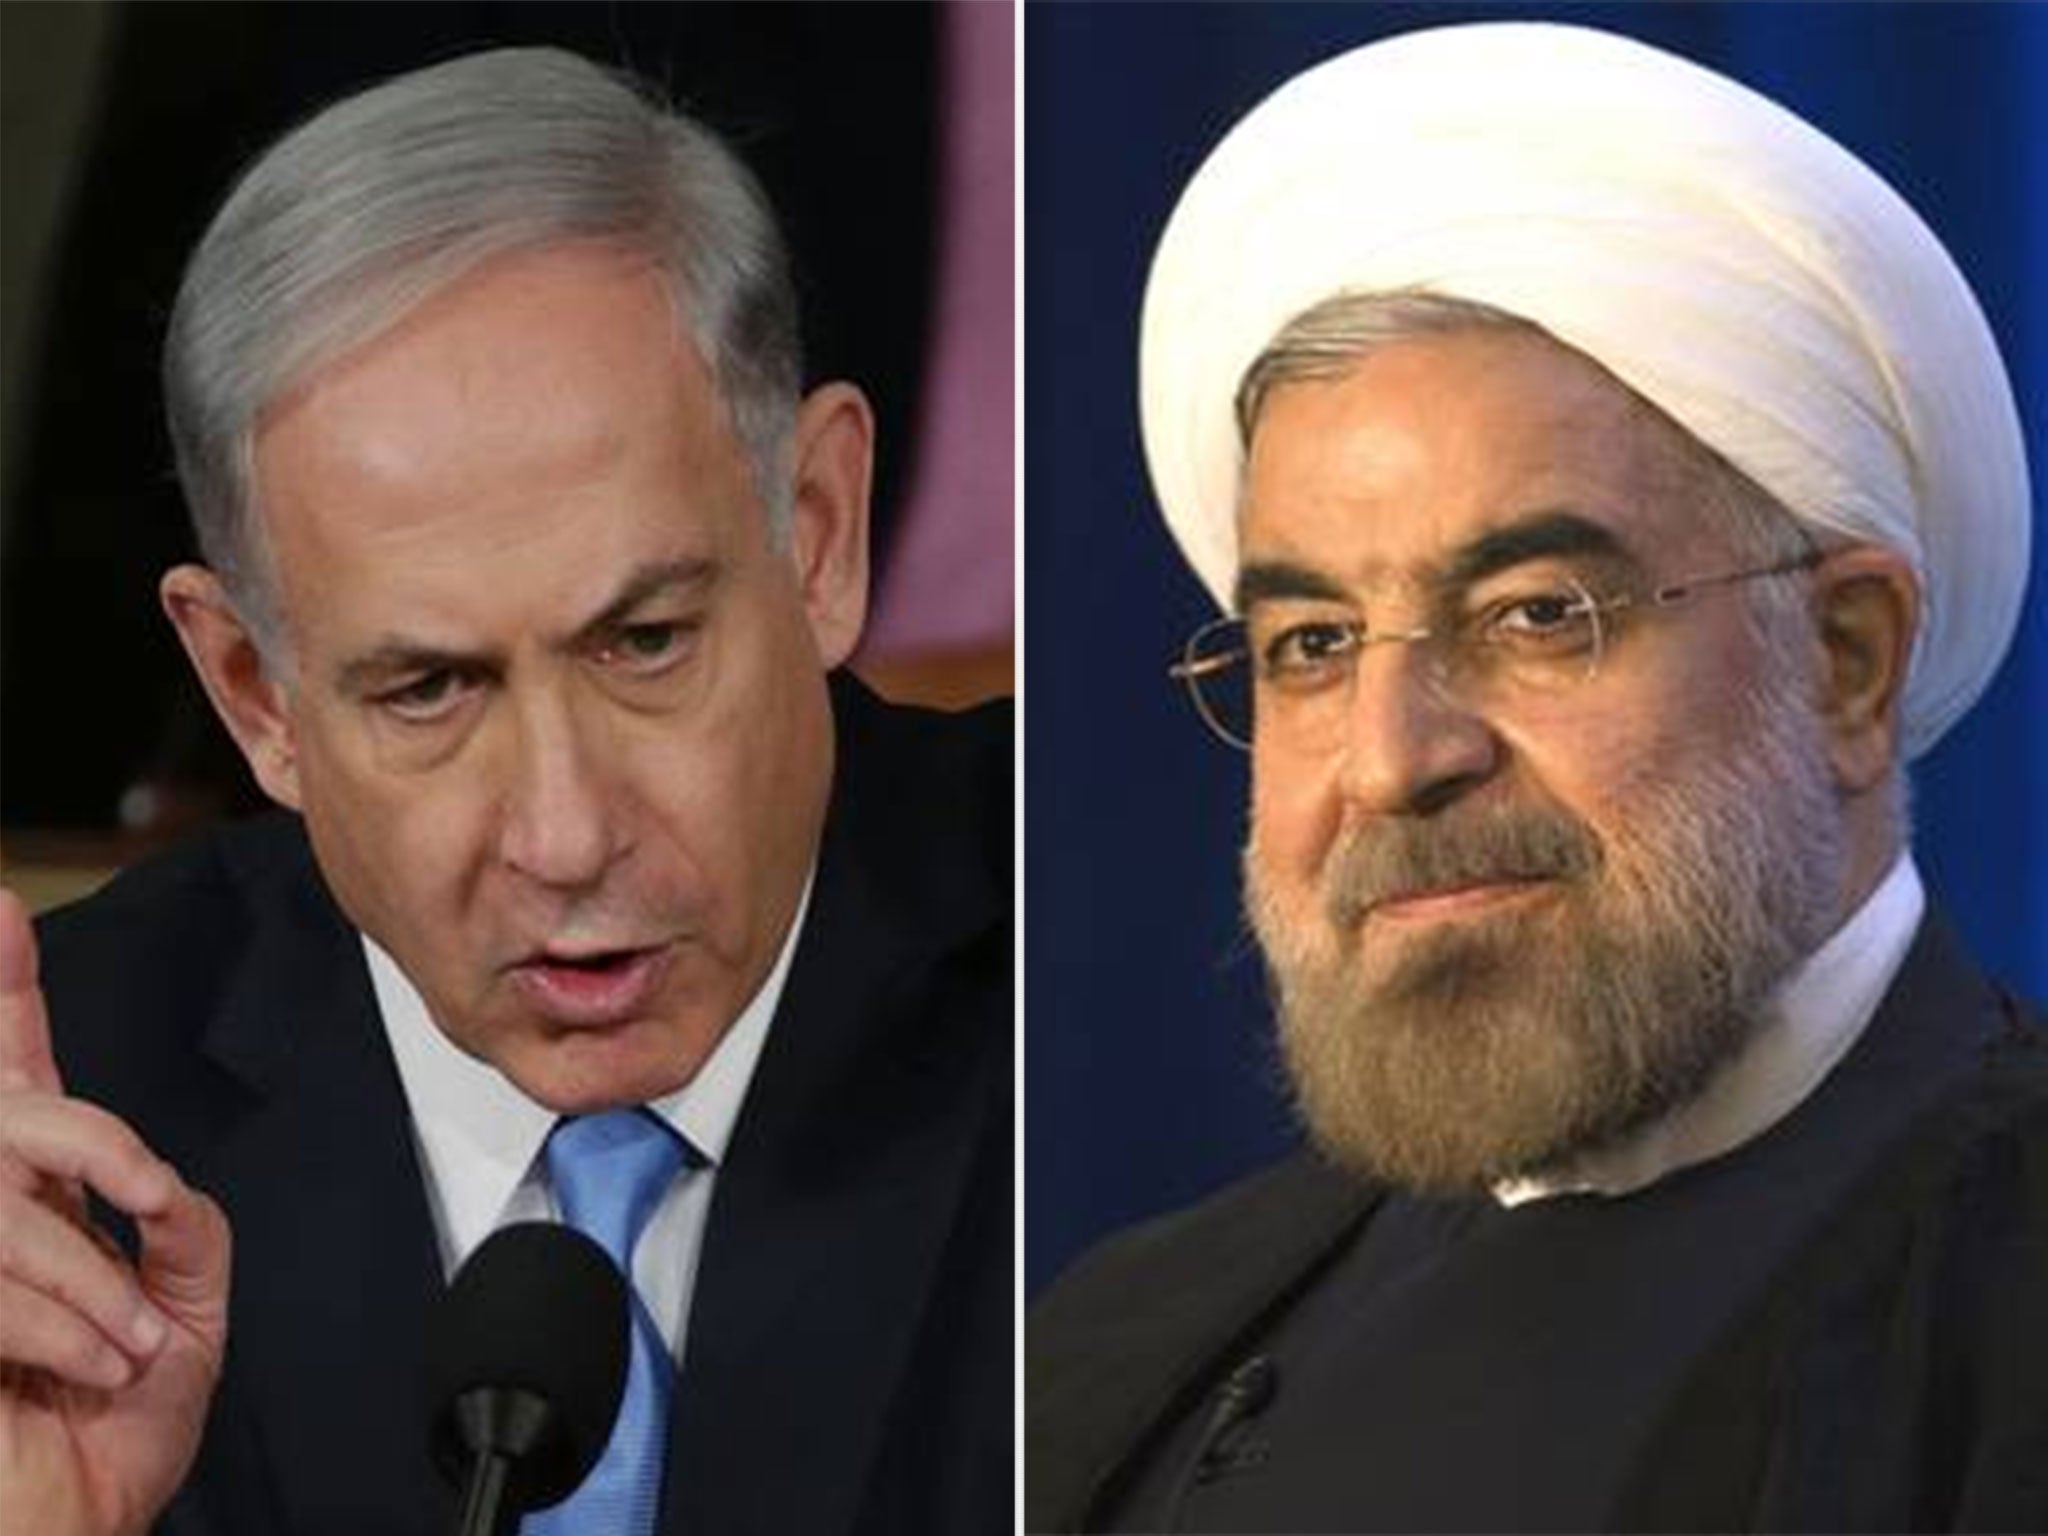 Netanyahu said deal with Iran would leave 'a Middle East littered with nuclear bombs'